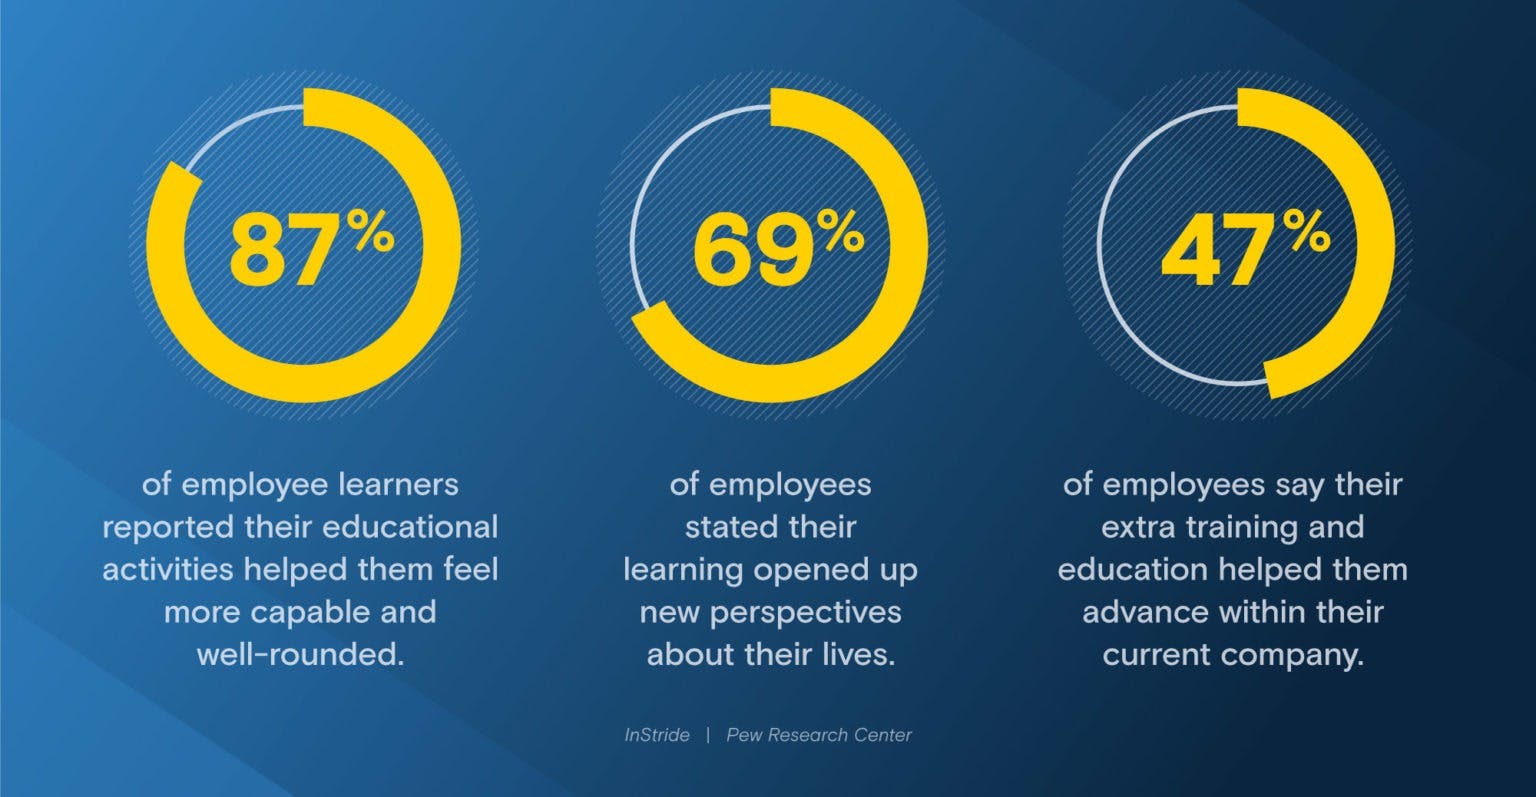 statistics about employee learning and education